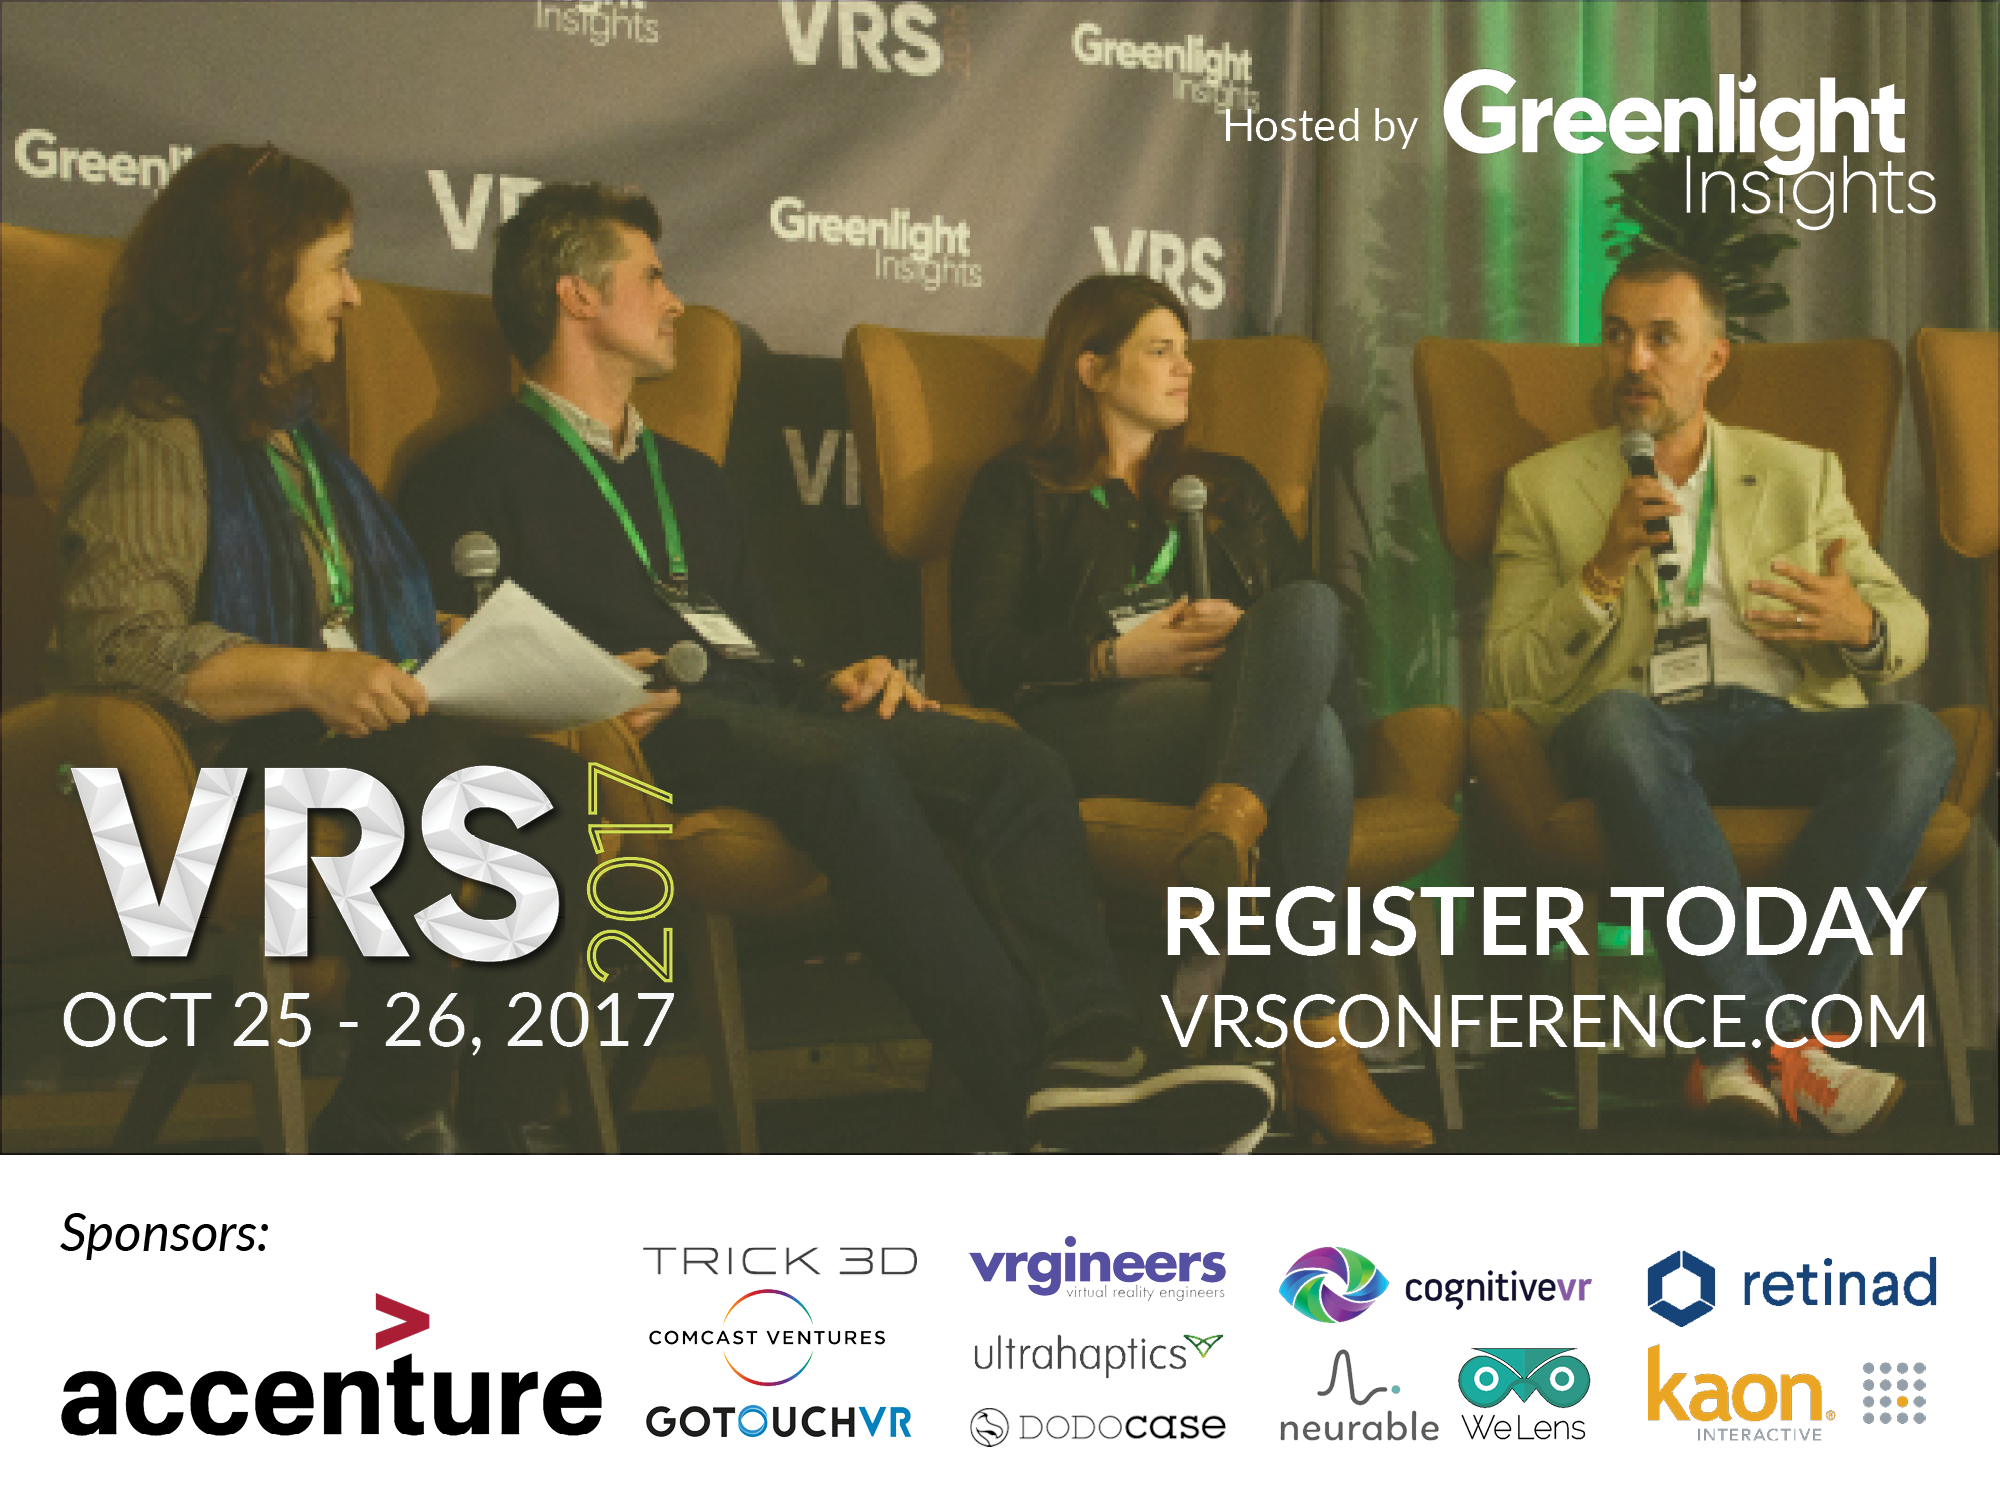 VR/AR Leaders From Amazon, Dell and BMW Finalized for VRS Conference 2017